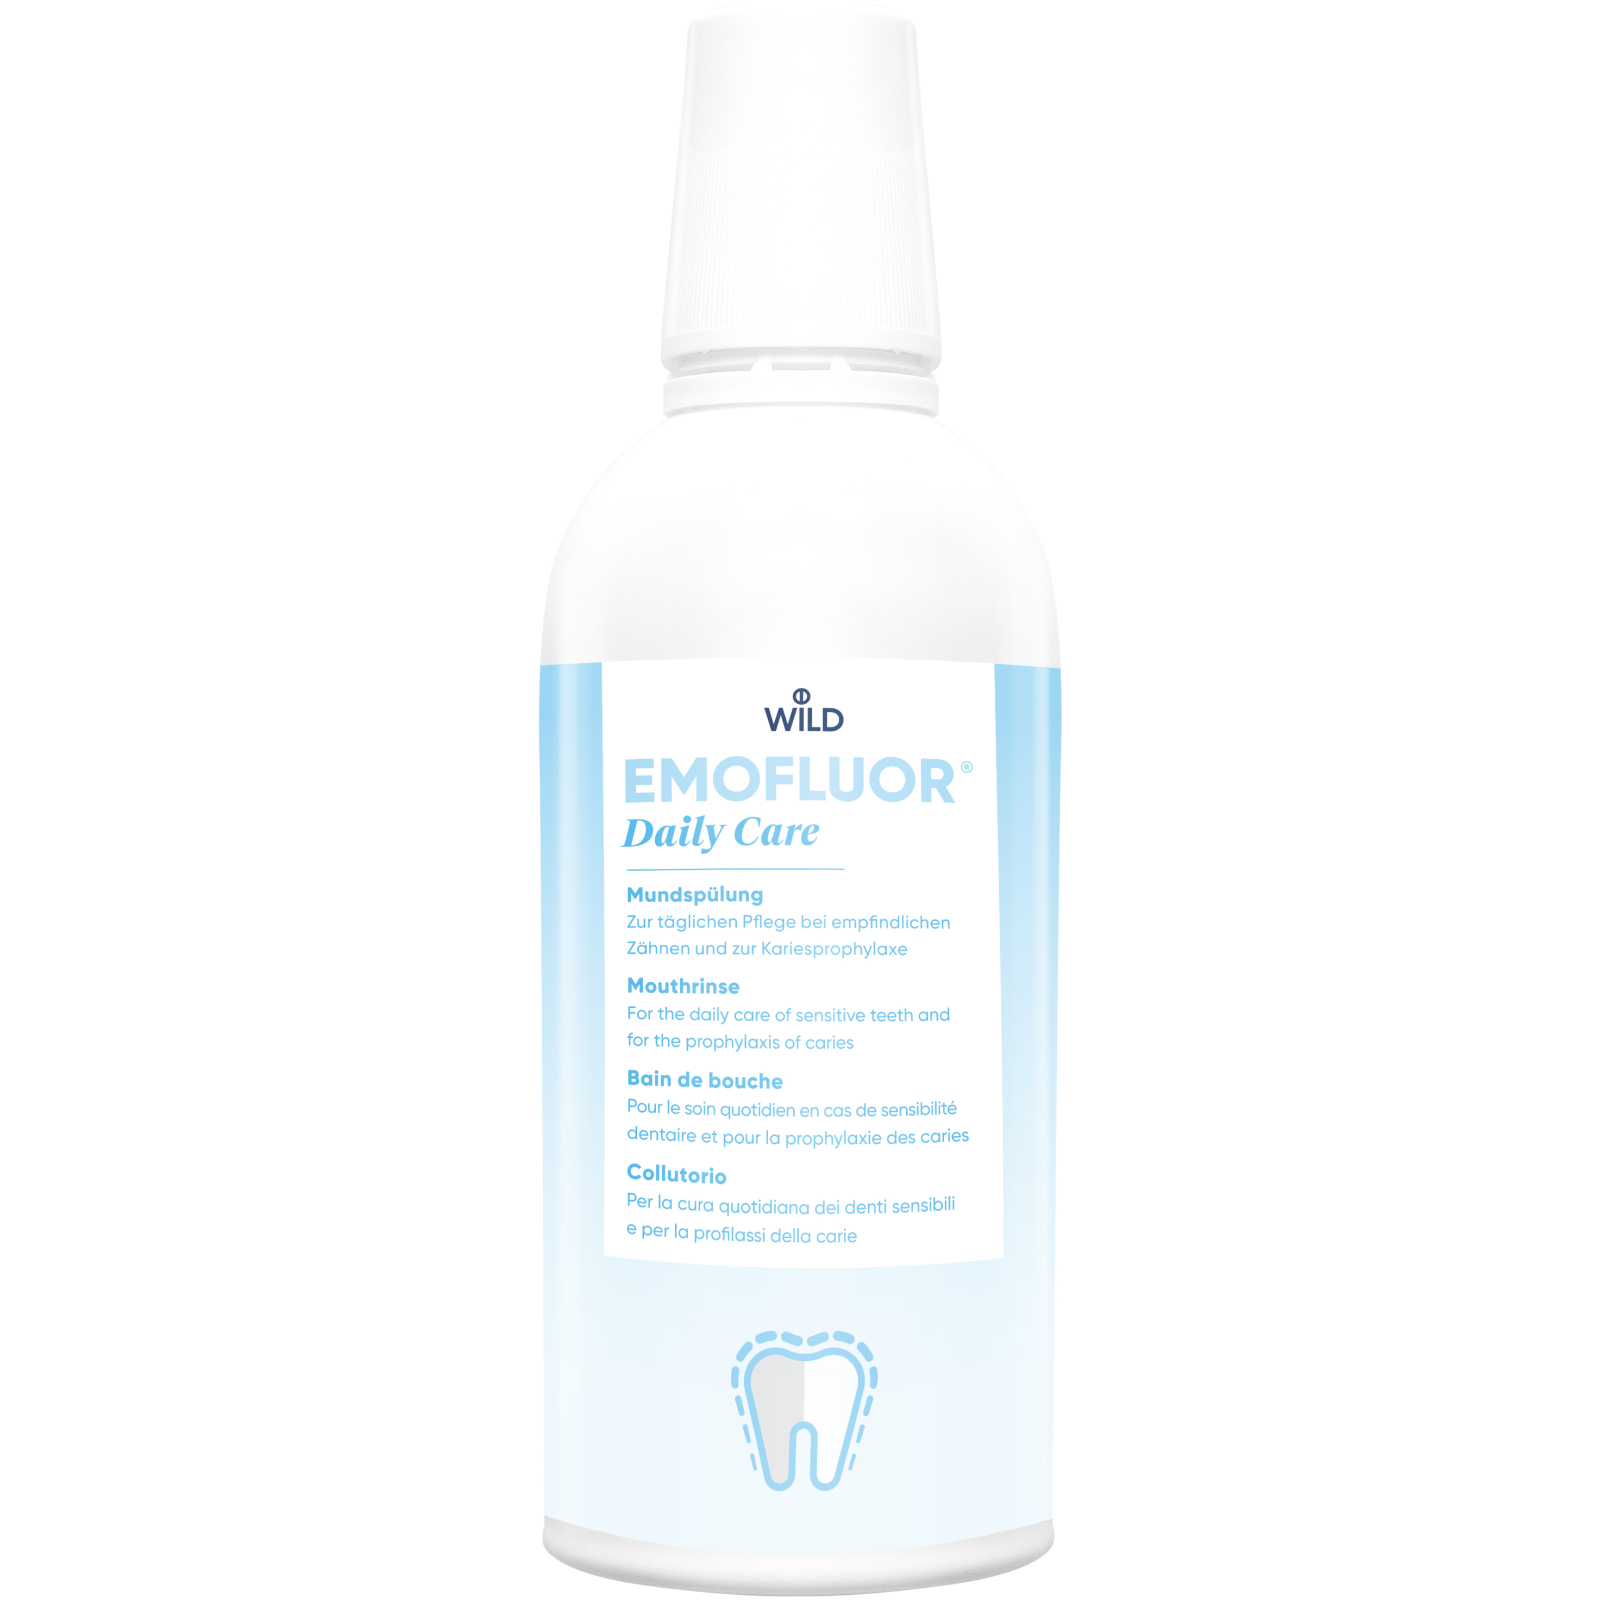 Oral rinse EMOFLUOR Daily Care Daily care